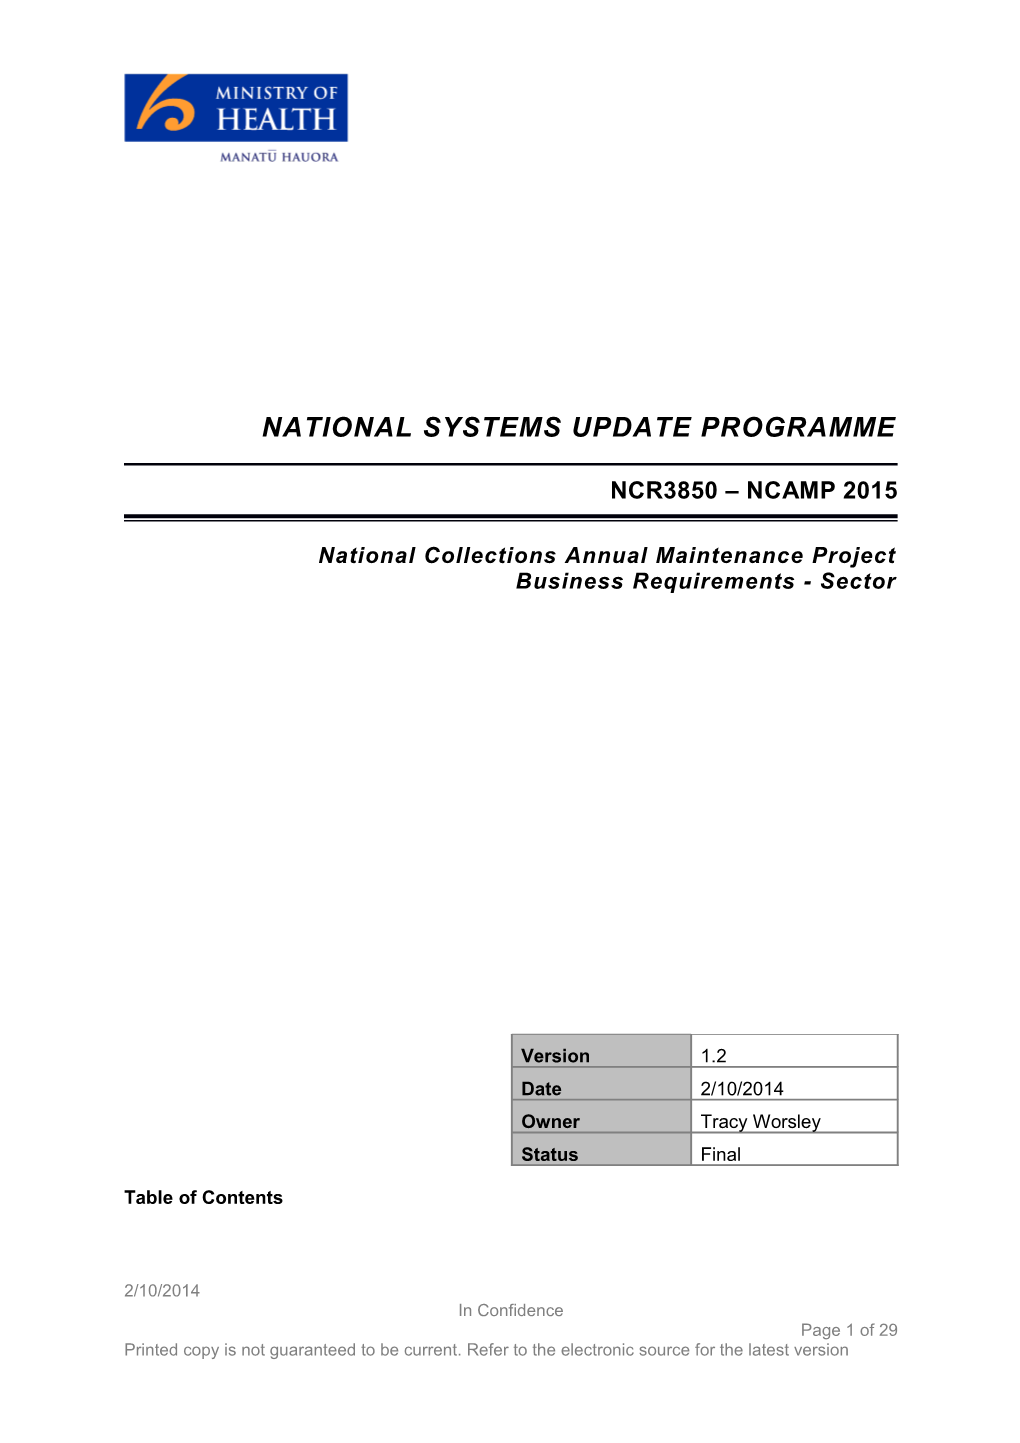 National Collections Annual Maintenance Project Business Requirements - Sector